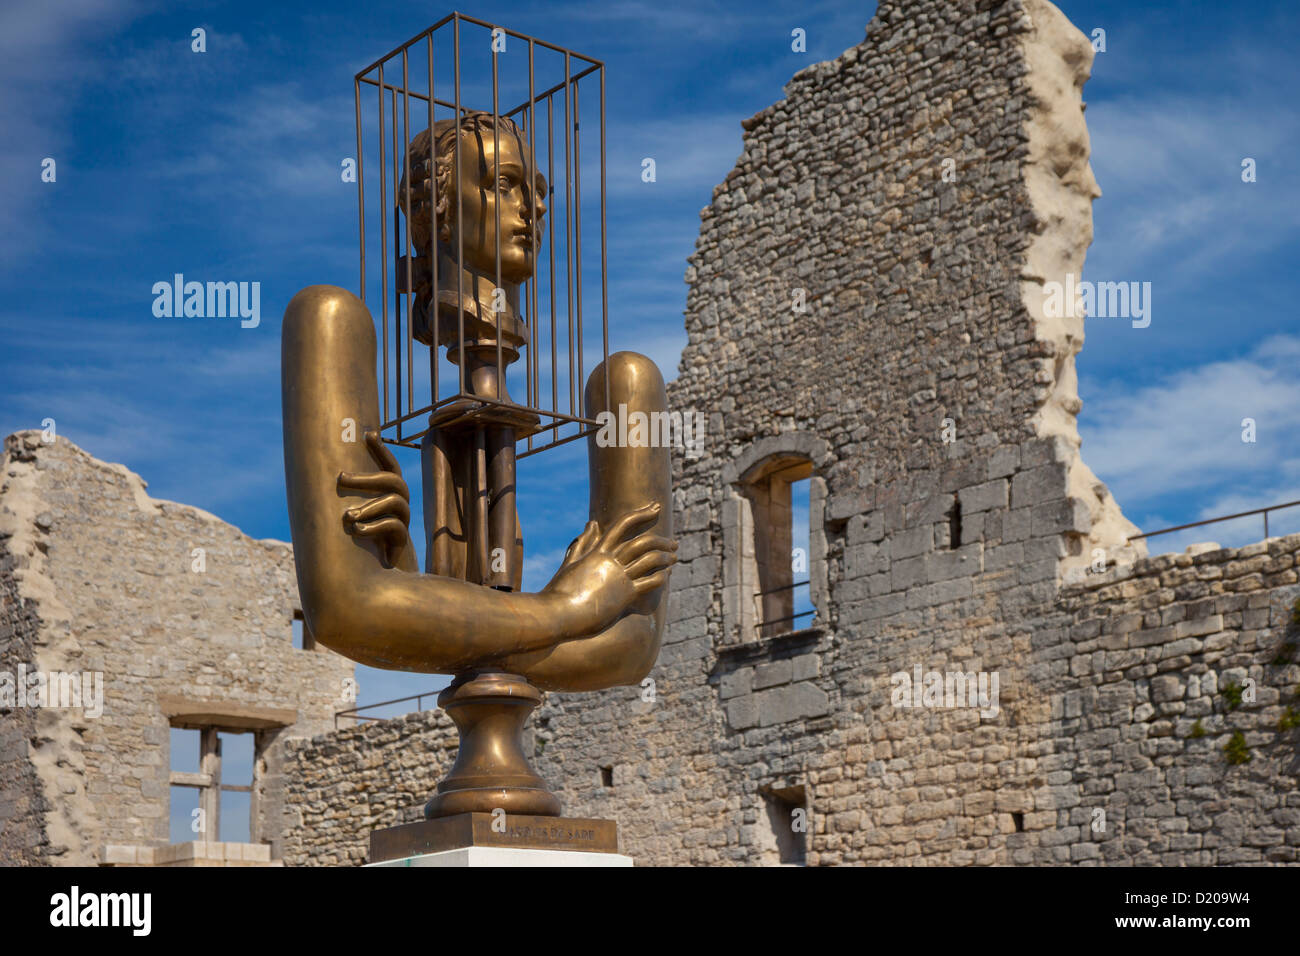 Metal Sculpture of Marquis de Sade by Alexandre Bourganov Outside Château Lacoste, Vaucluse Luberon Provence France Stock Photo